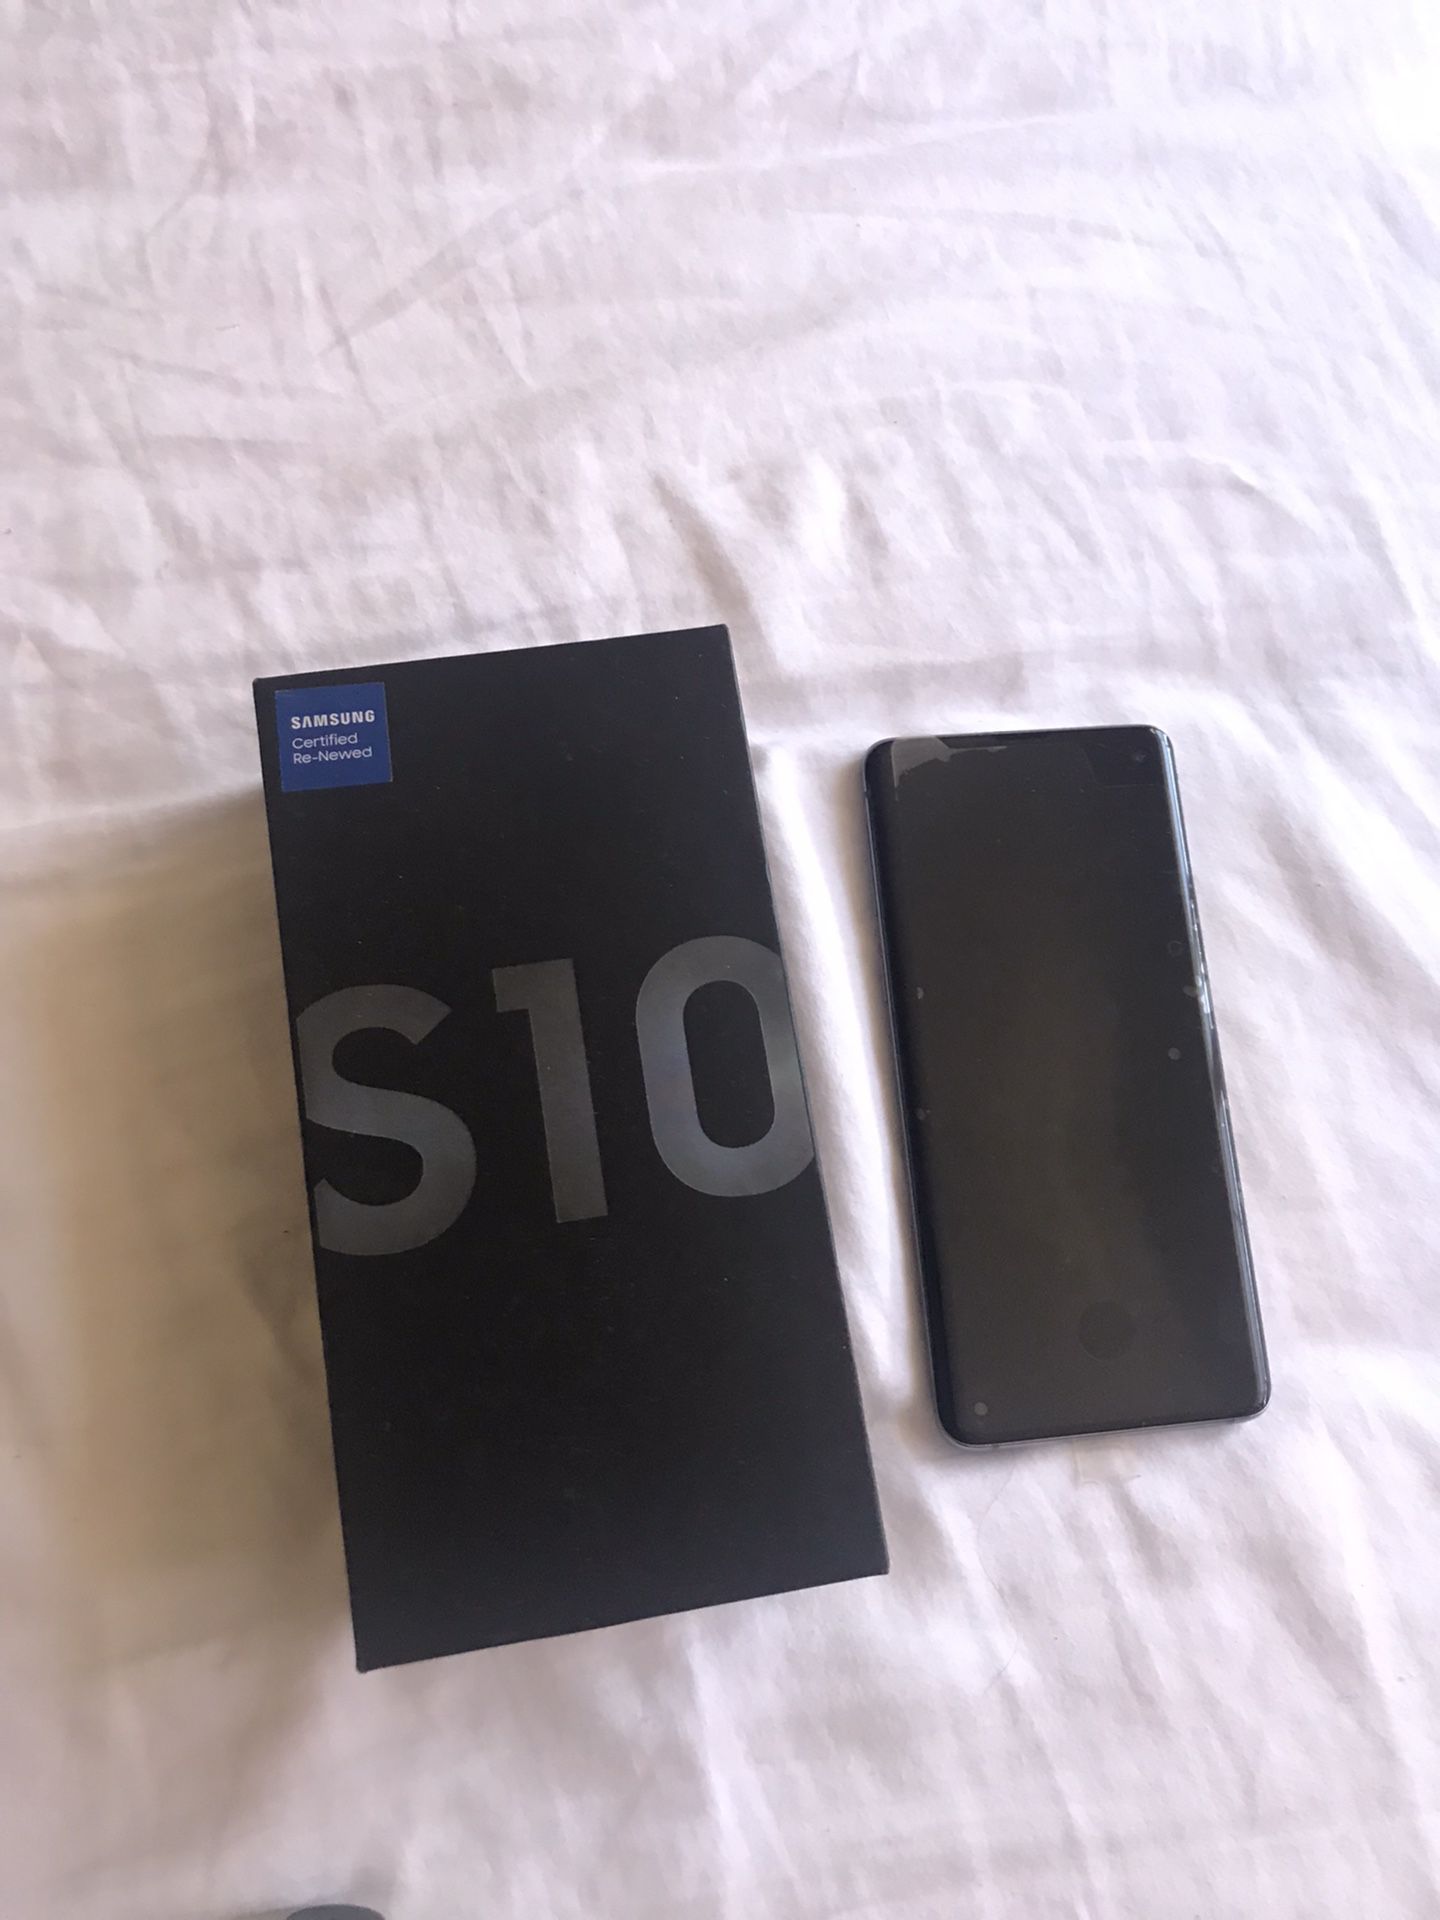 Samsung Galaxy S10+ for Sale  Buy New, Used, & Certified